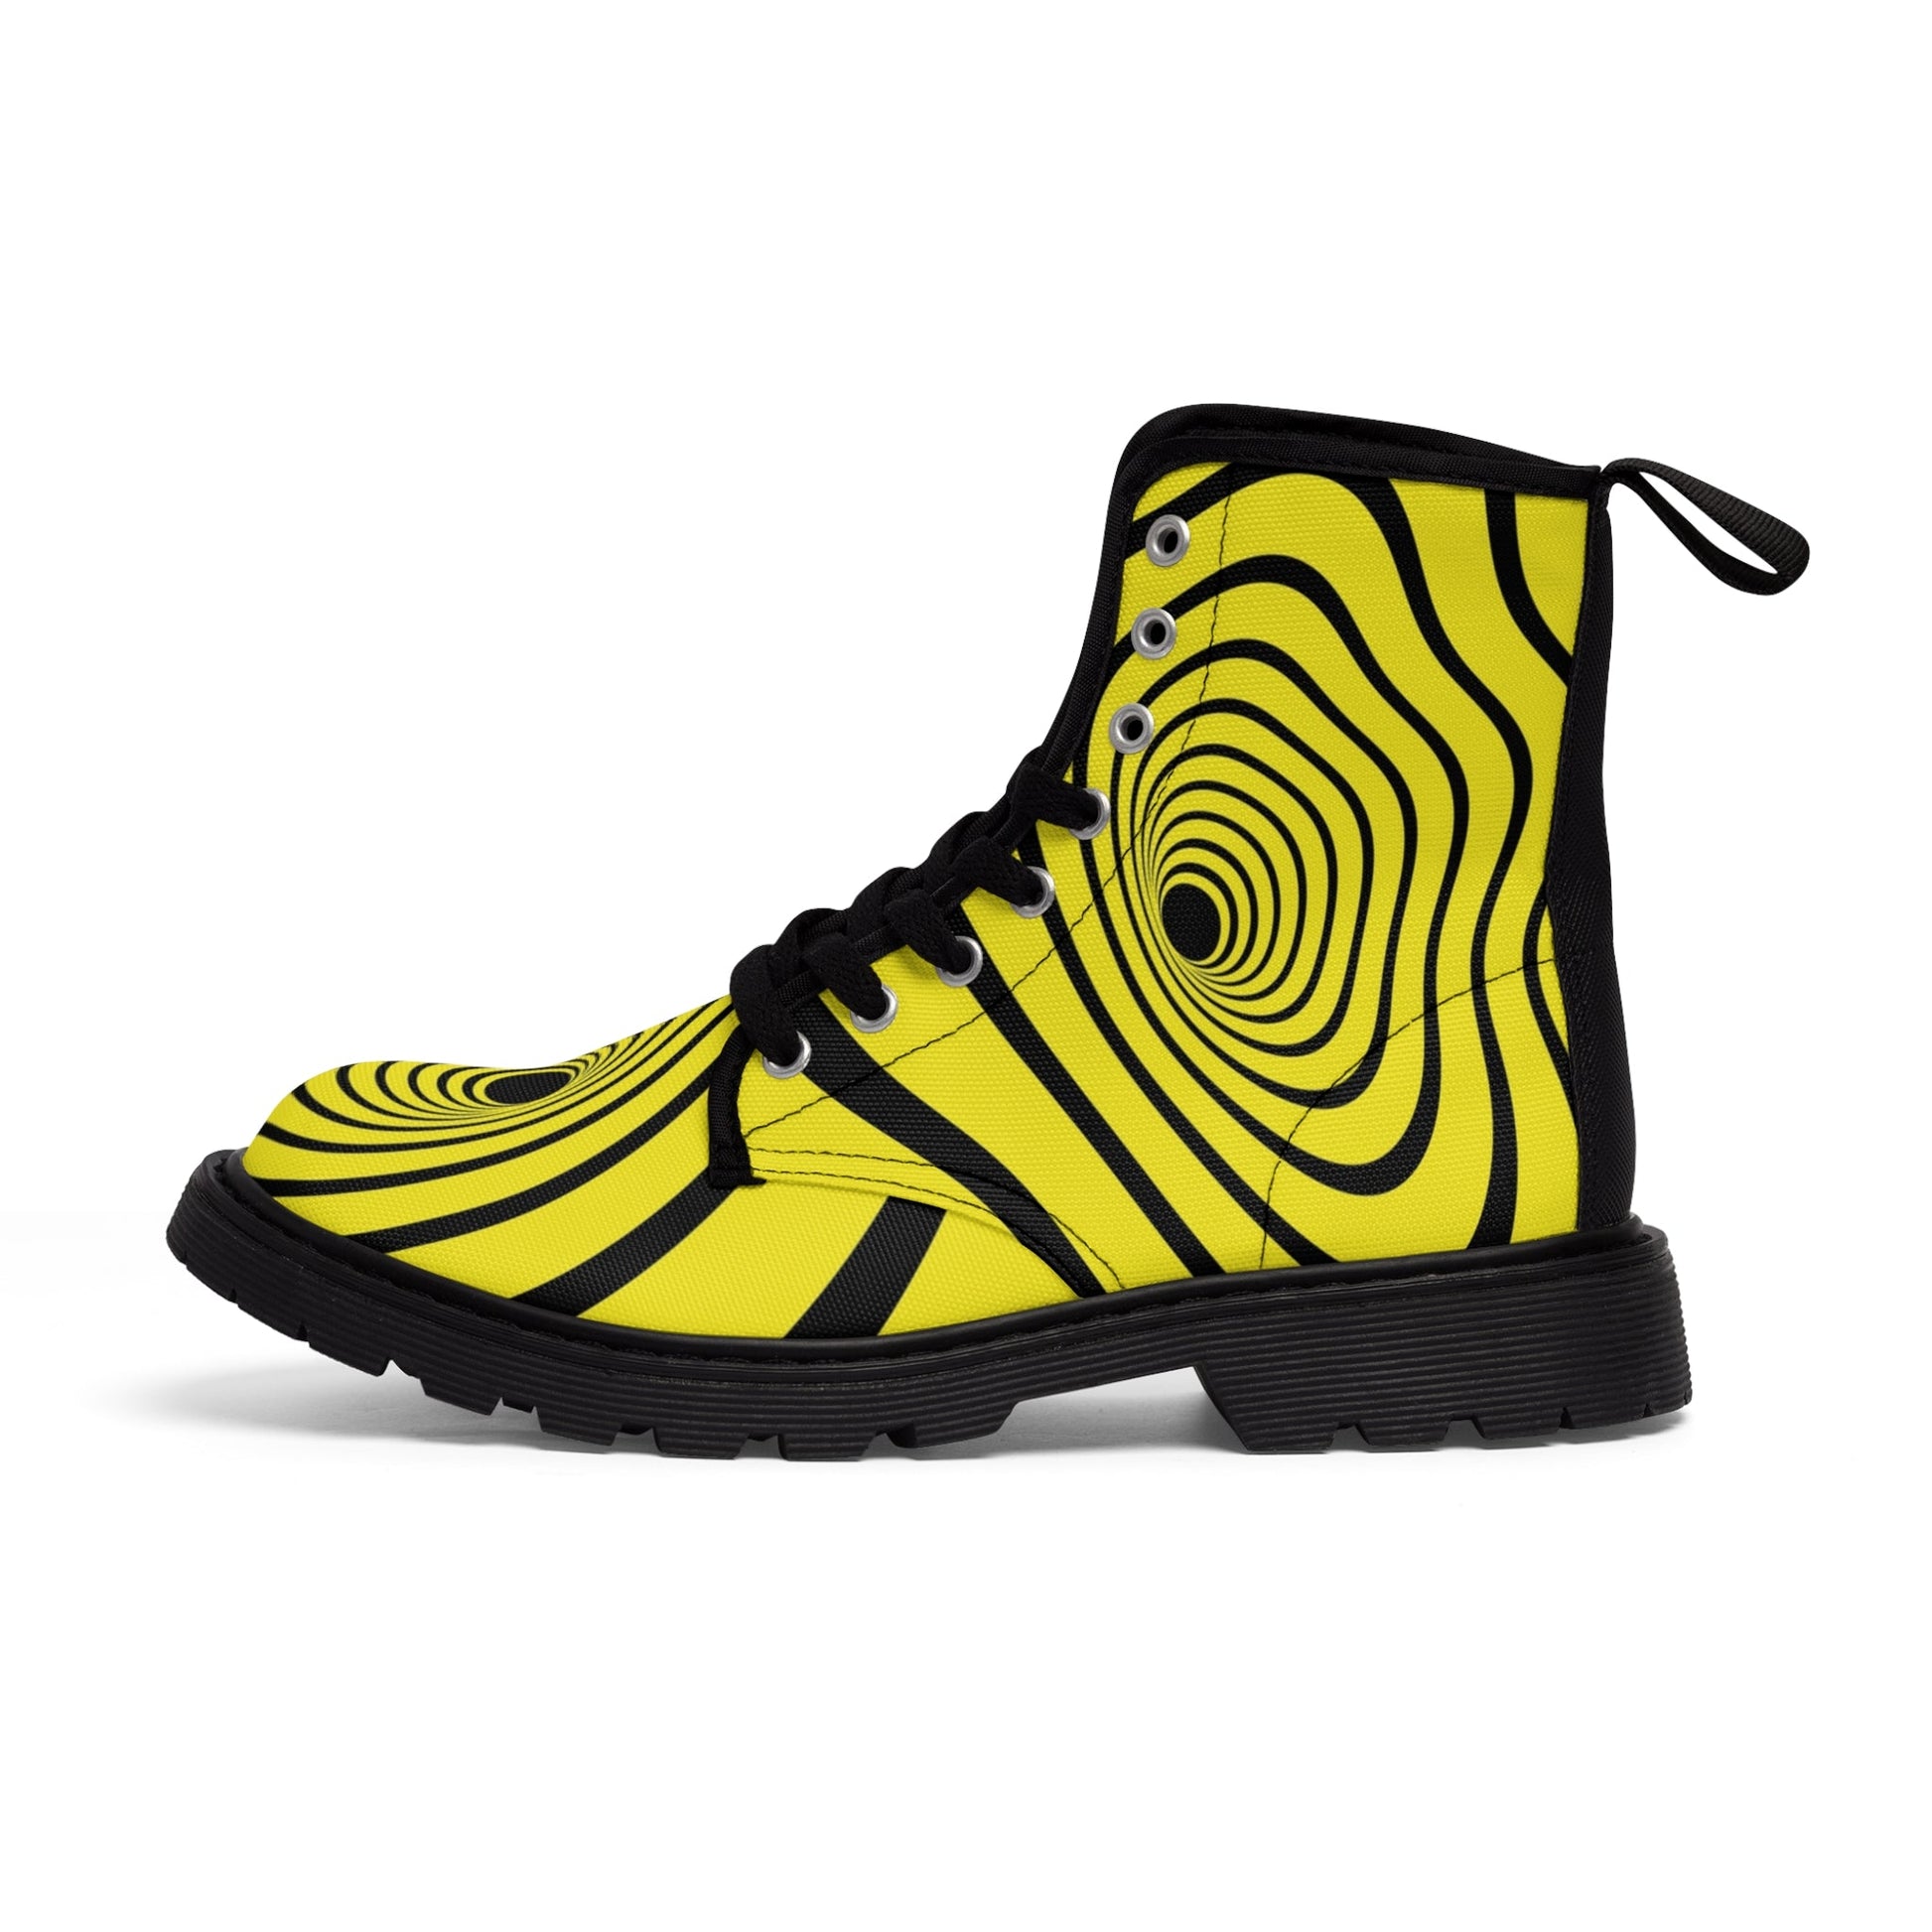 Shoes - Psychedelic Yellow Zebra Women's Canvas Boots